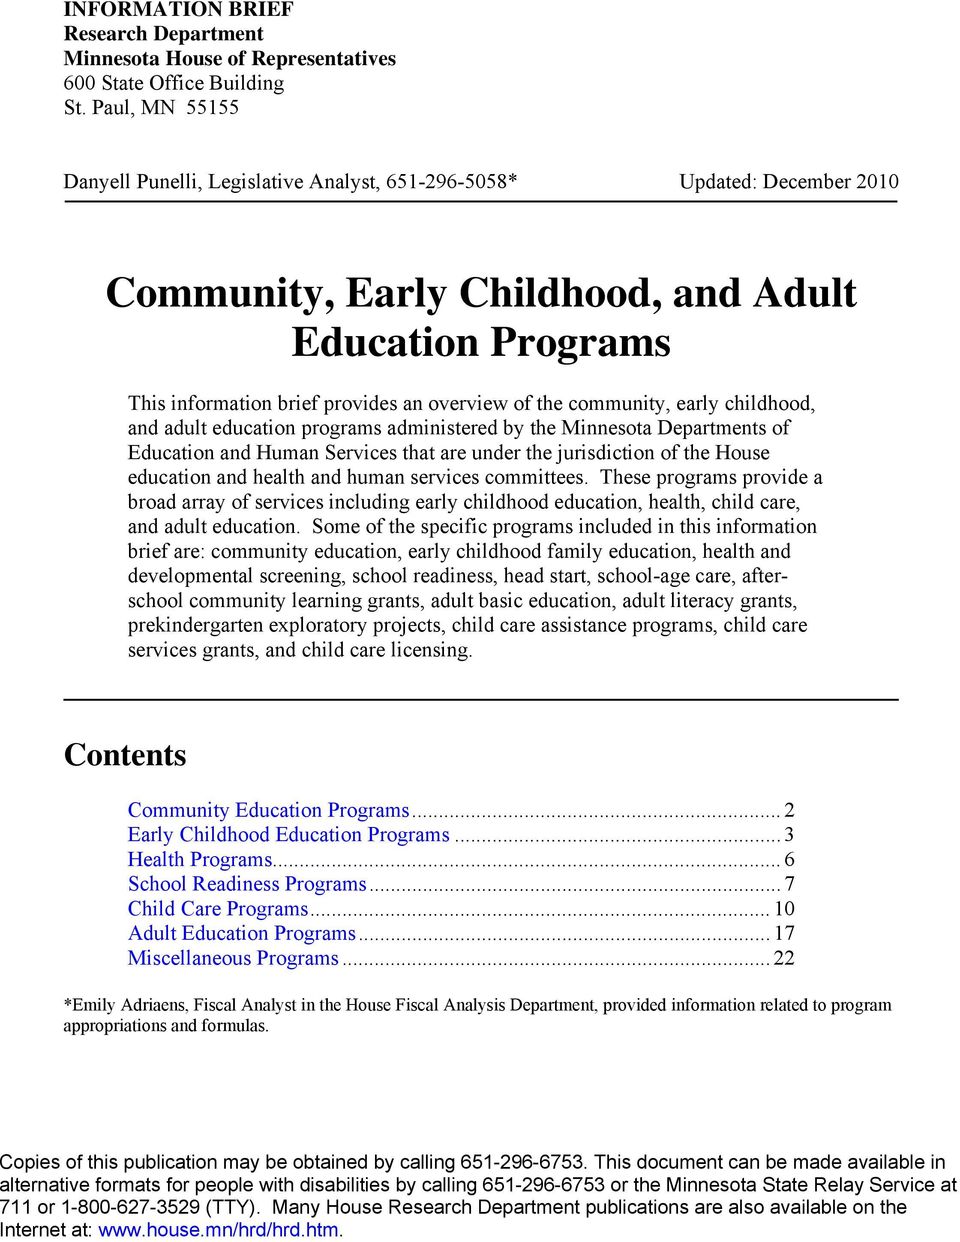 community, early childhood, and adult education programs administered by the Minnesota Departments of Education and Human Services that are under the jurisdiction of the House education and health